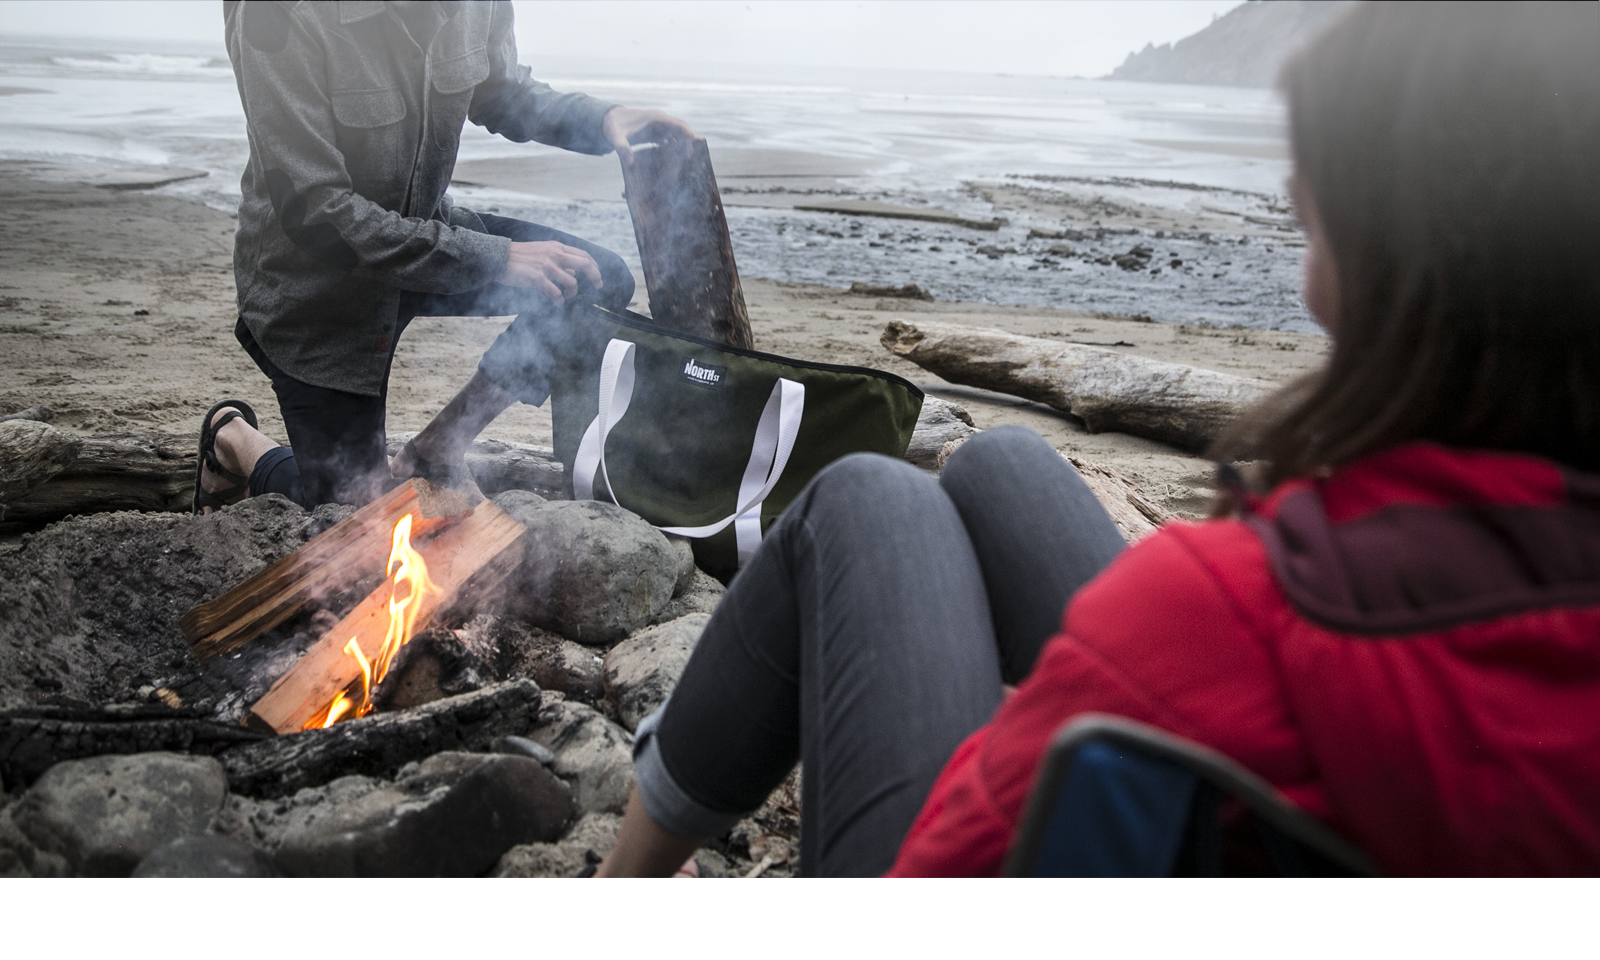 A couple builds a campfire on a beach with a Tote bag. | North St Bags